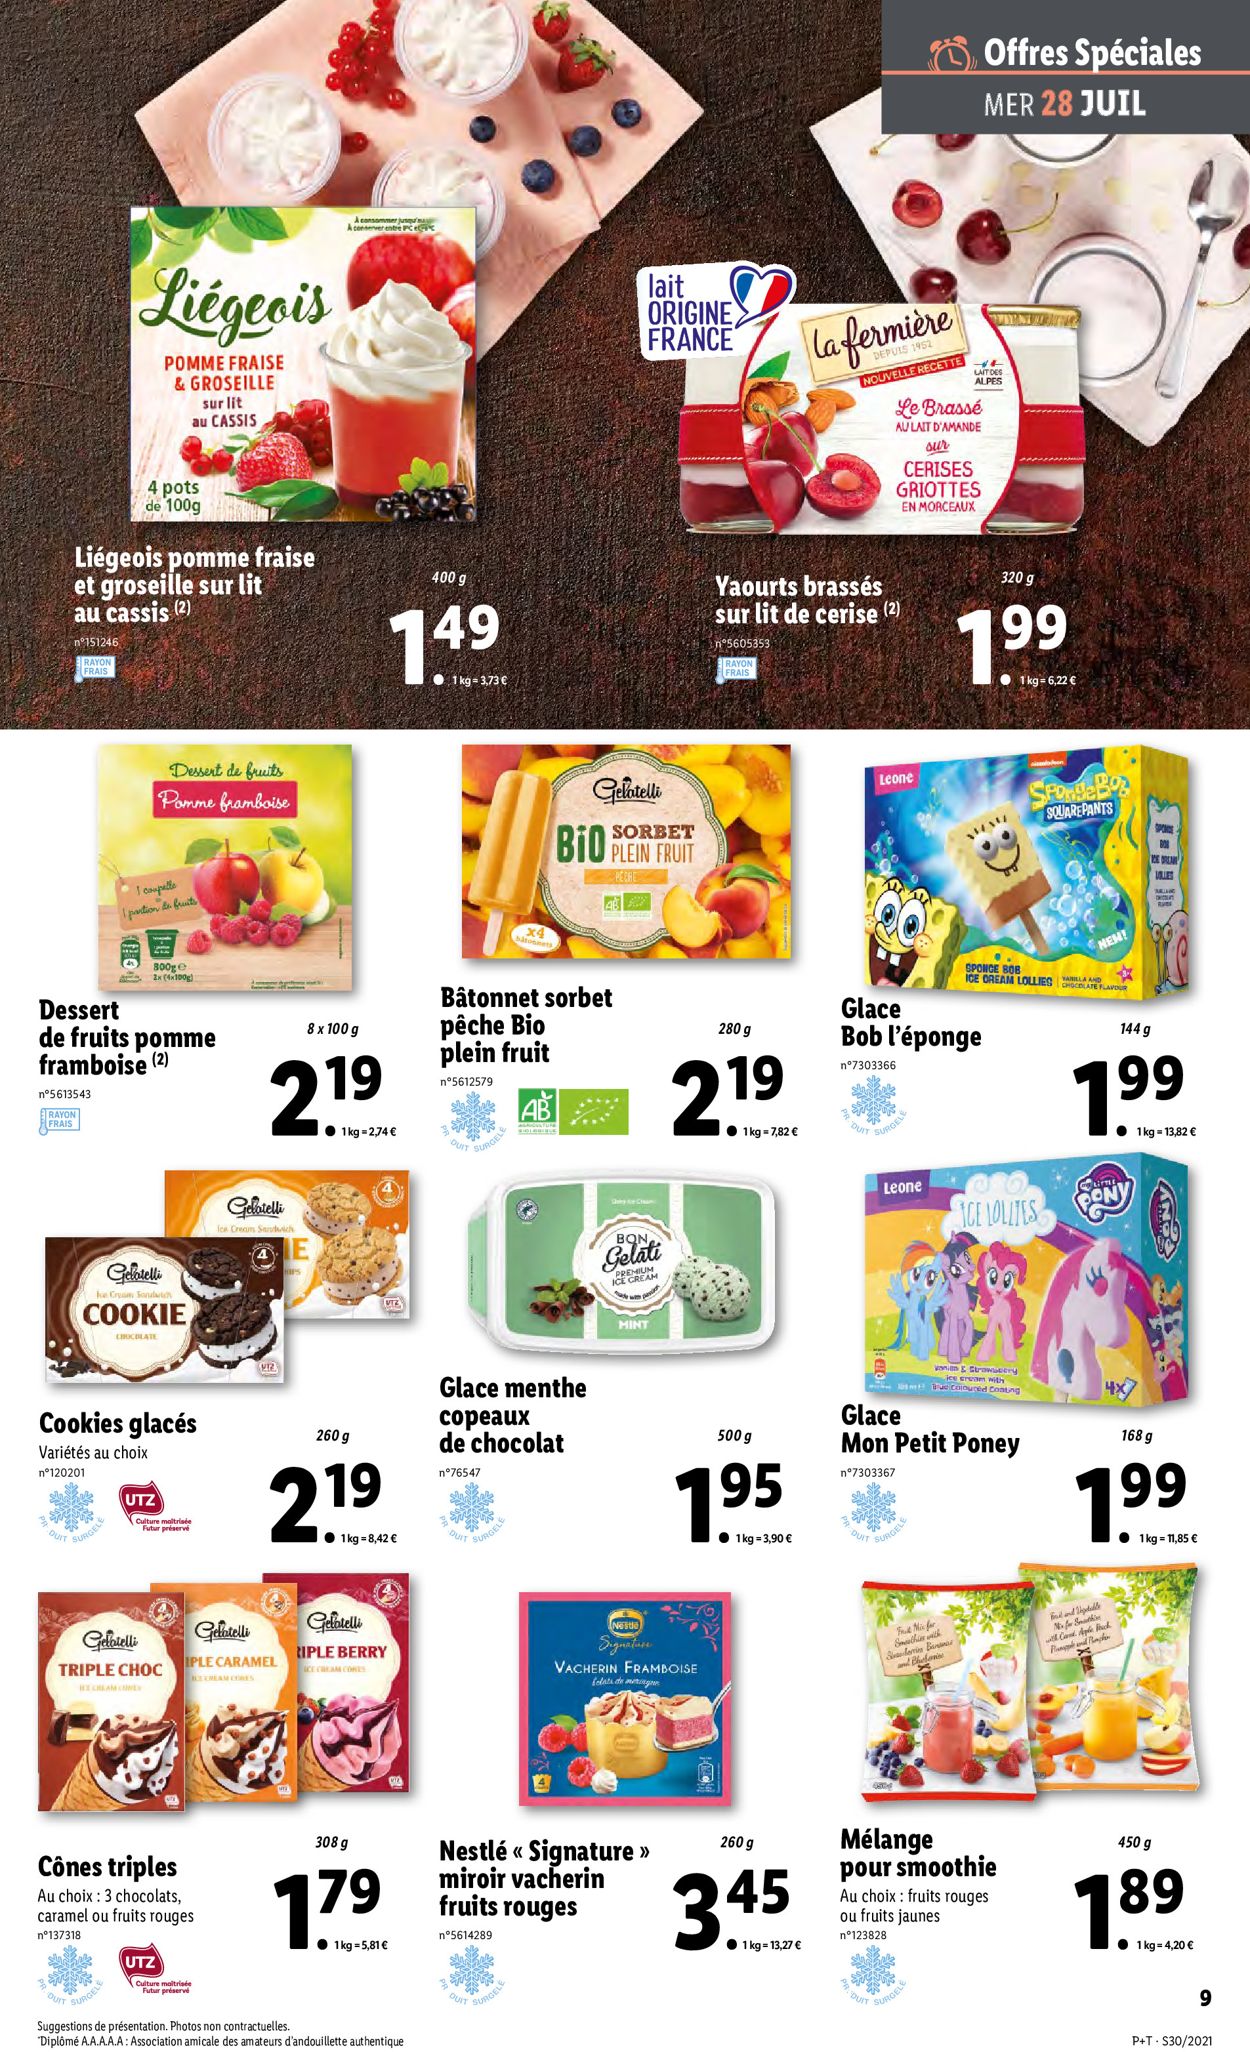 Lidl Catalogue - 28.07-03.08.2021 (Page 11)